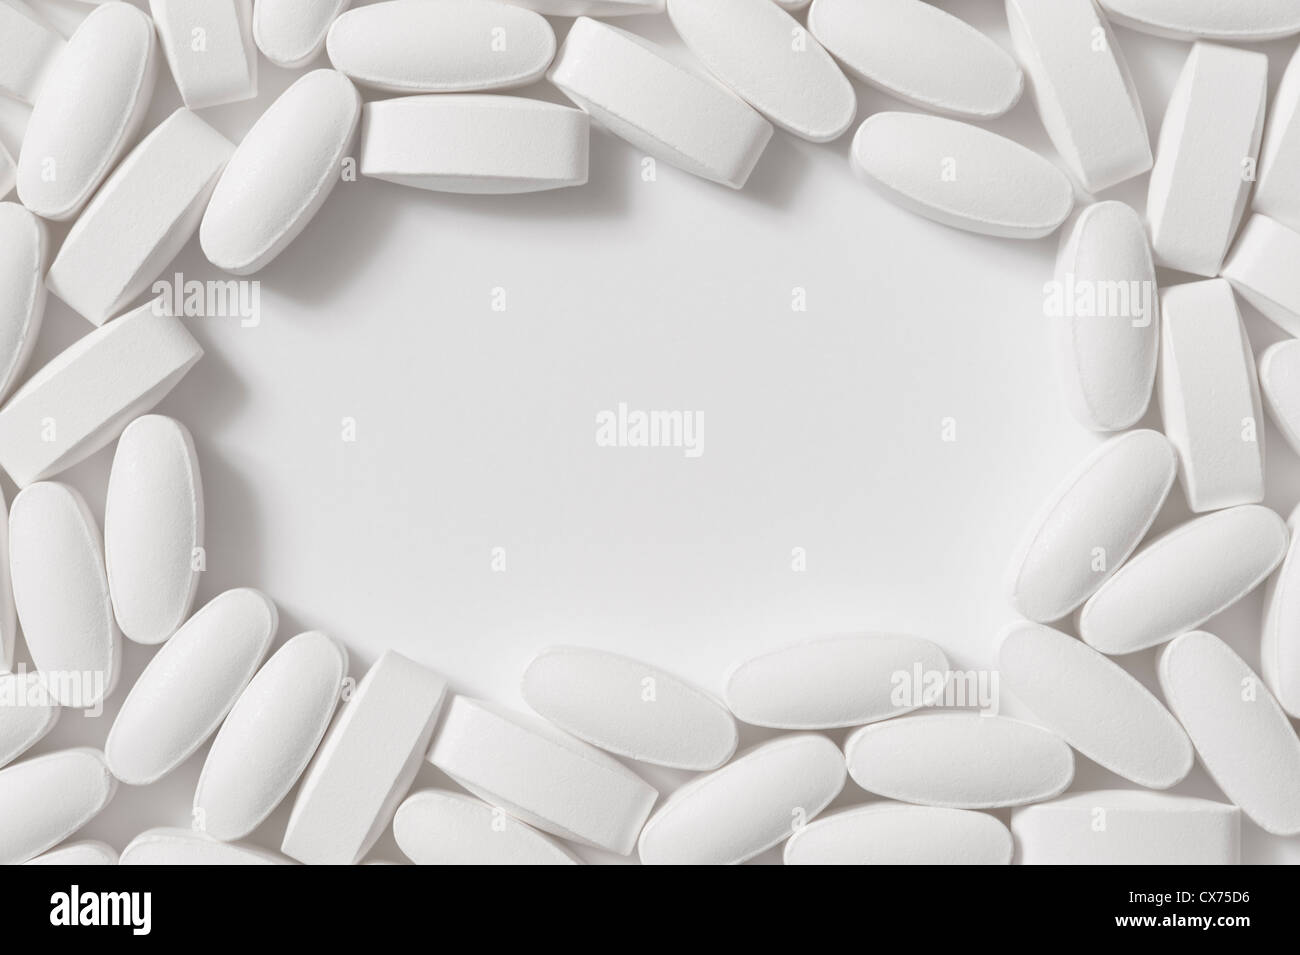 PILLS SUPPLEMENTS DRUGS White on a white background Space for Copy landscape- Concept Stock Photo